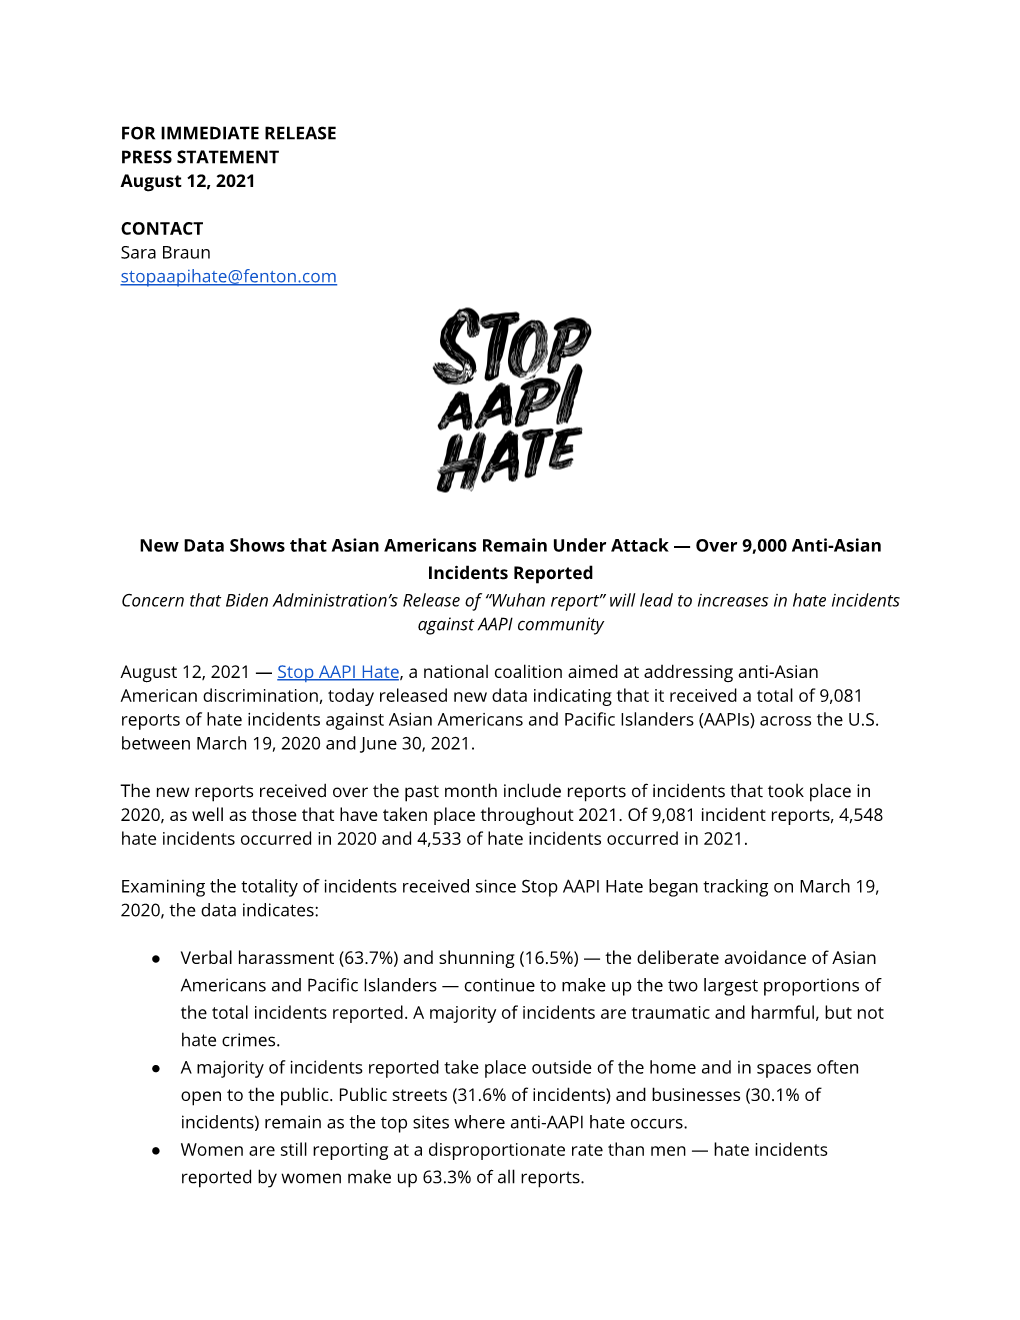 Stop AAPI Hate National Report Press Release